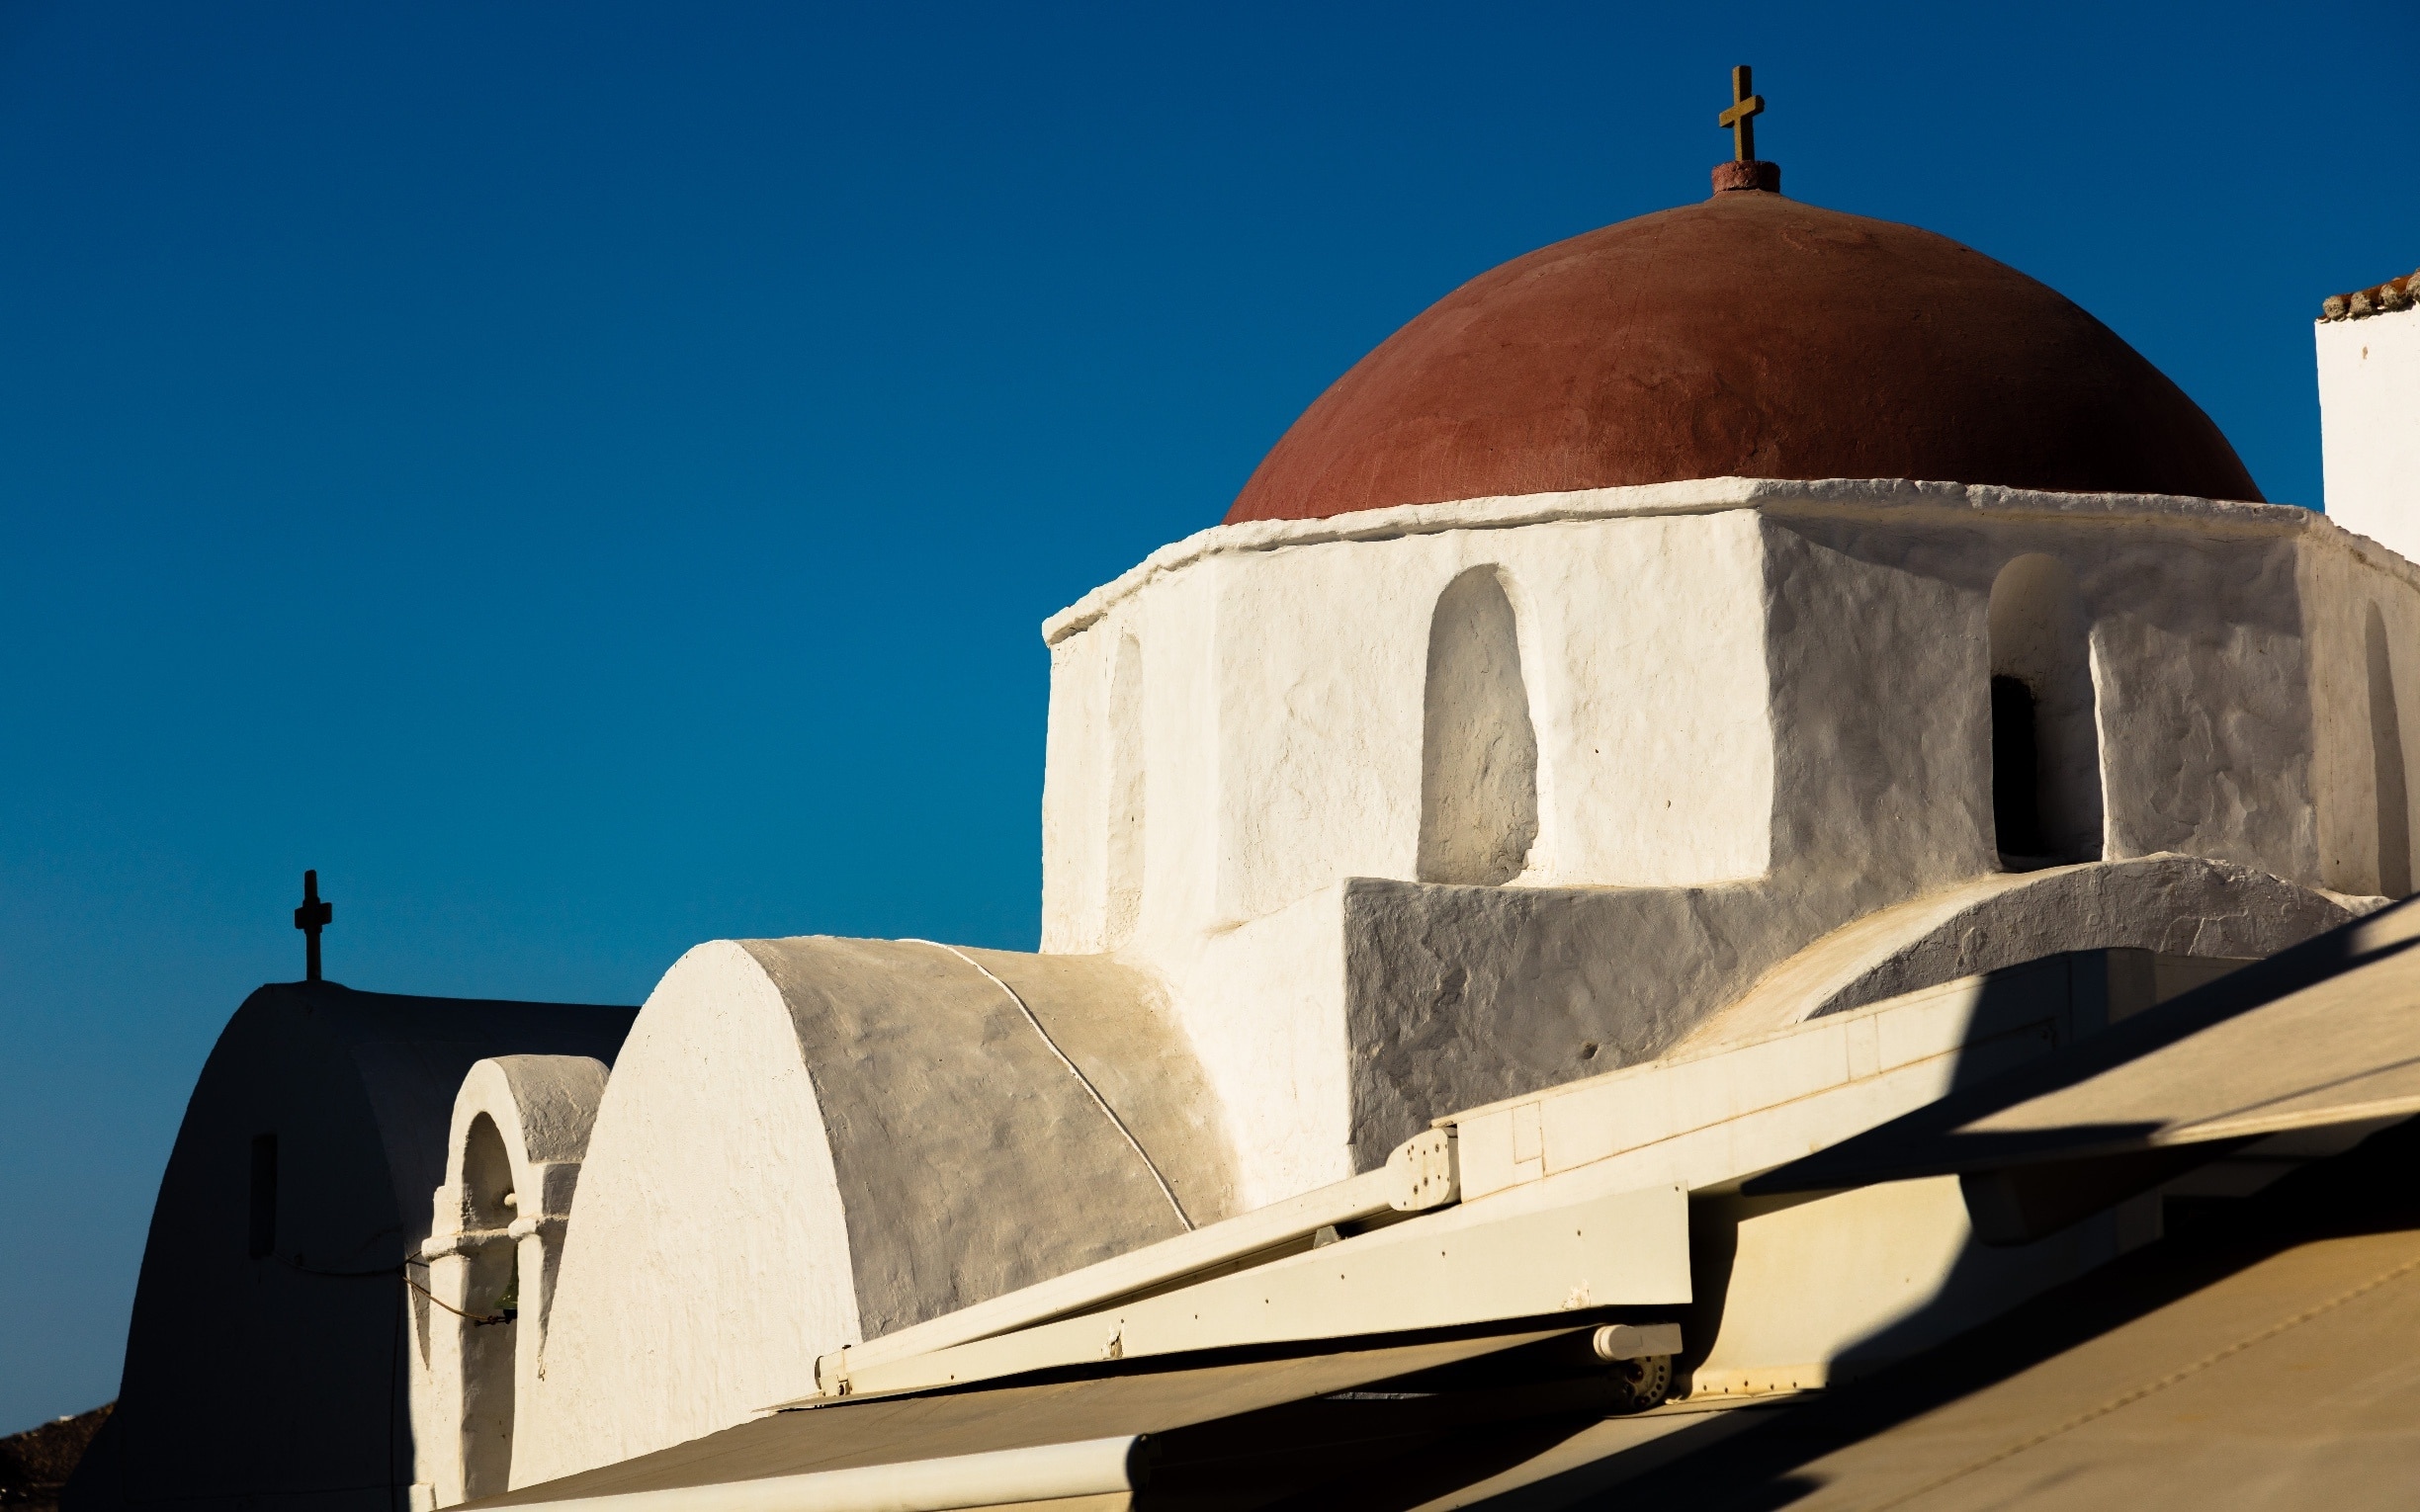 can't get tired from the white and pastels of the beautiful abstract Cycladic architecture of Mykonos

#BVStrove
 